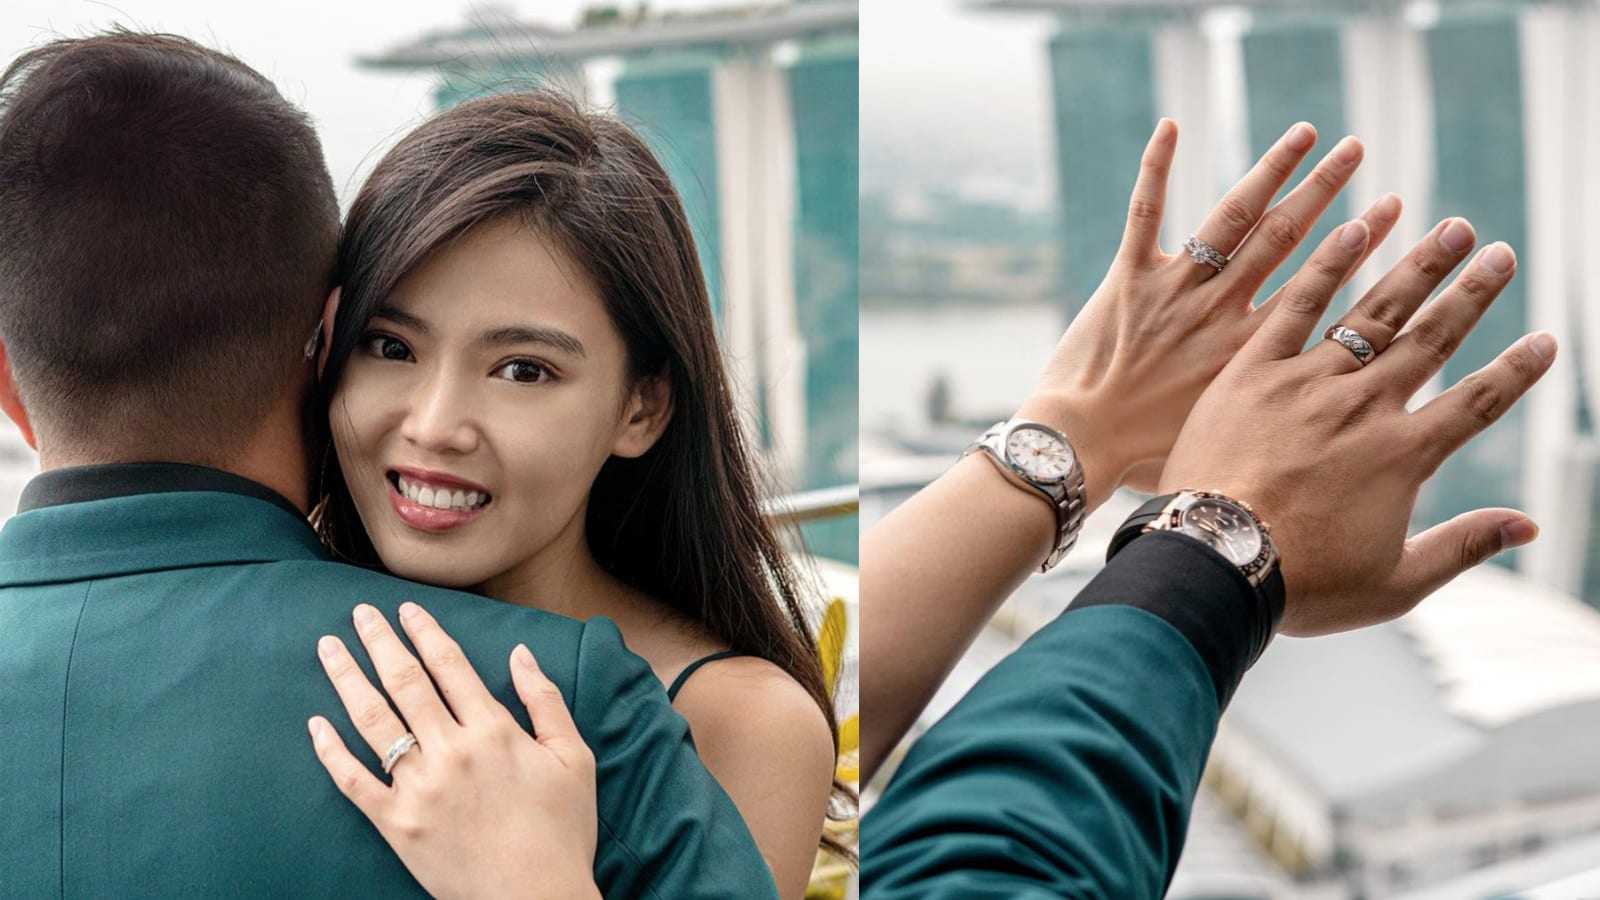 Kimberly Chia, 26, Is Married To A 34-Year-Old Businessman & Has A Baby On The Way